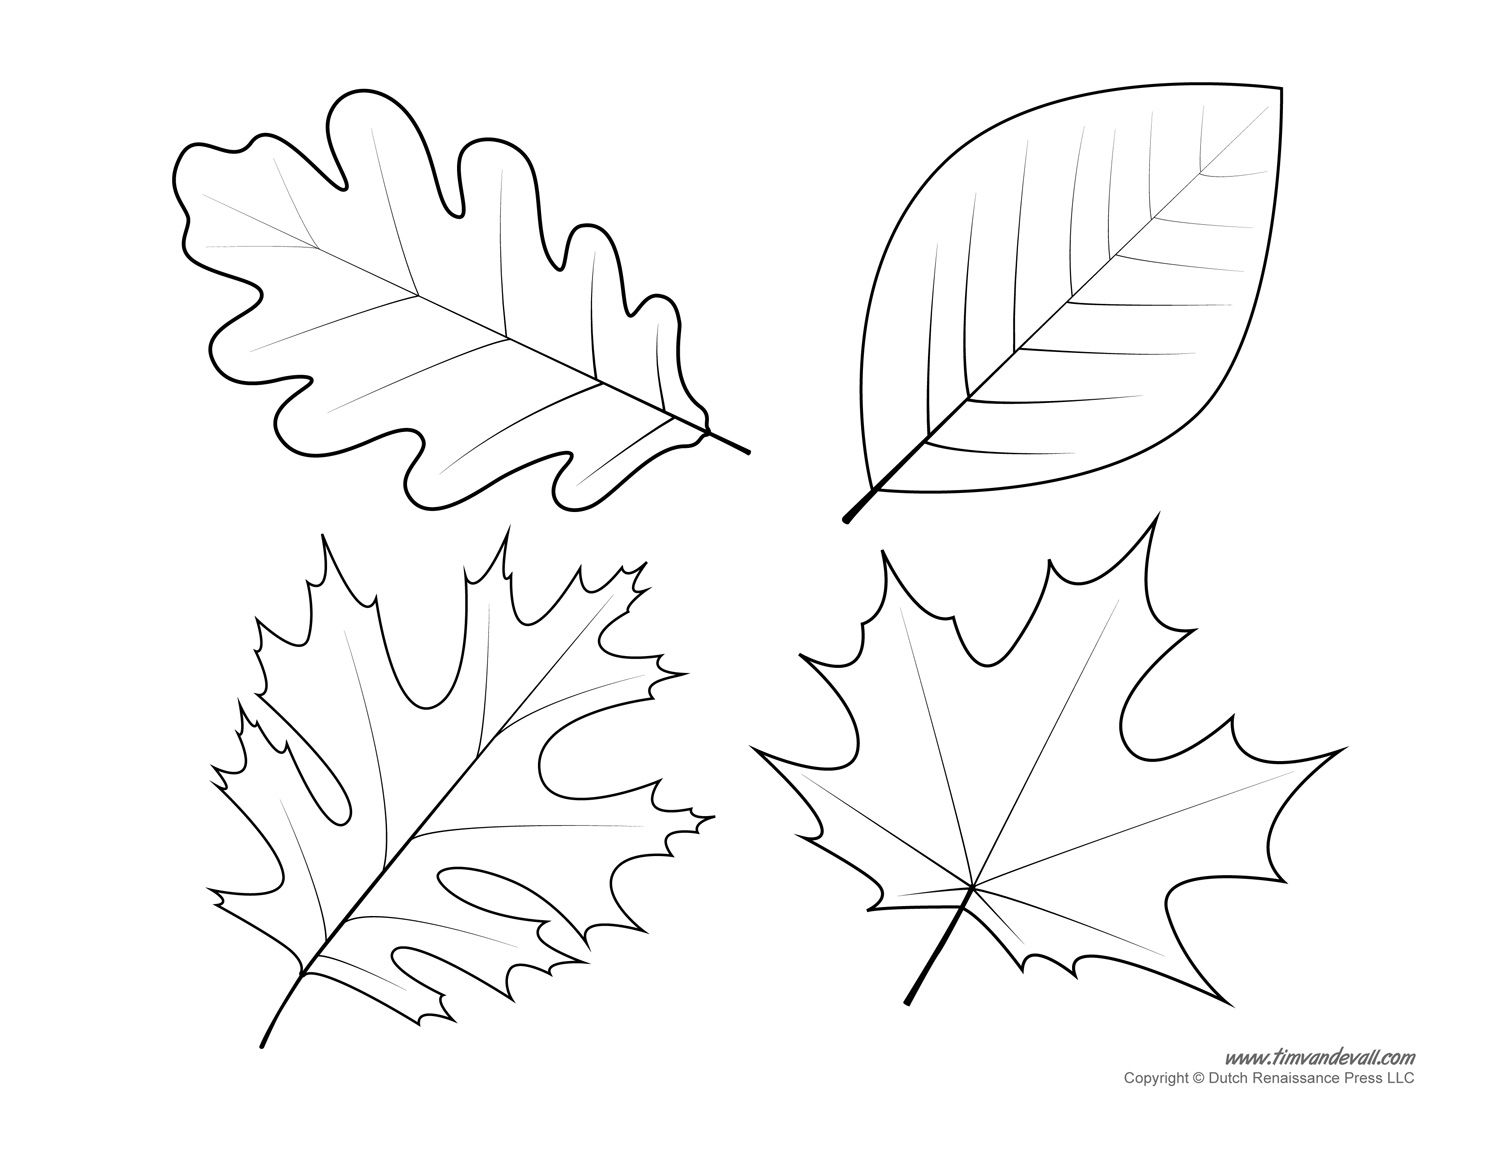 traceable-leaf-patterns-coloring-home